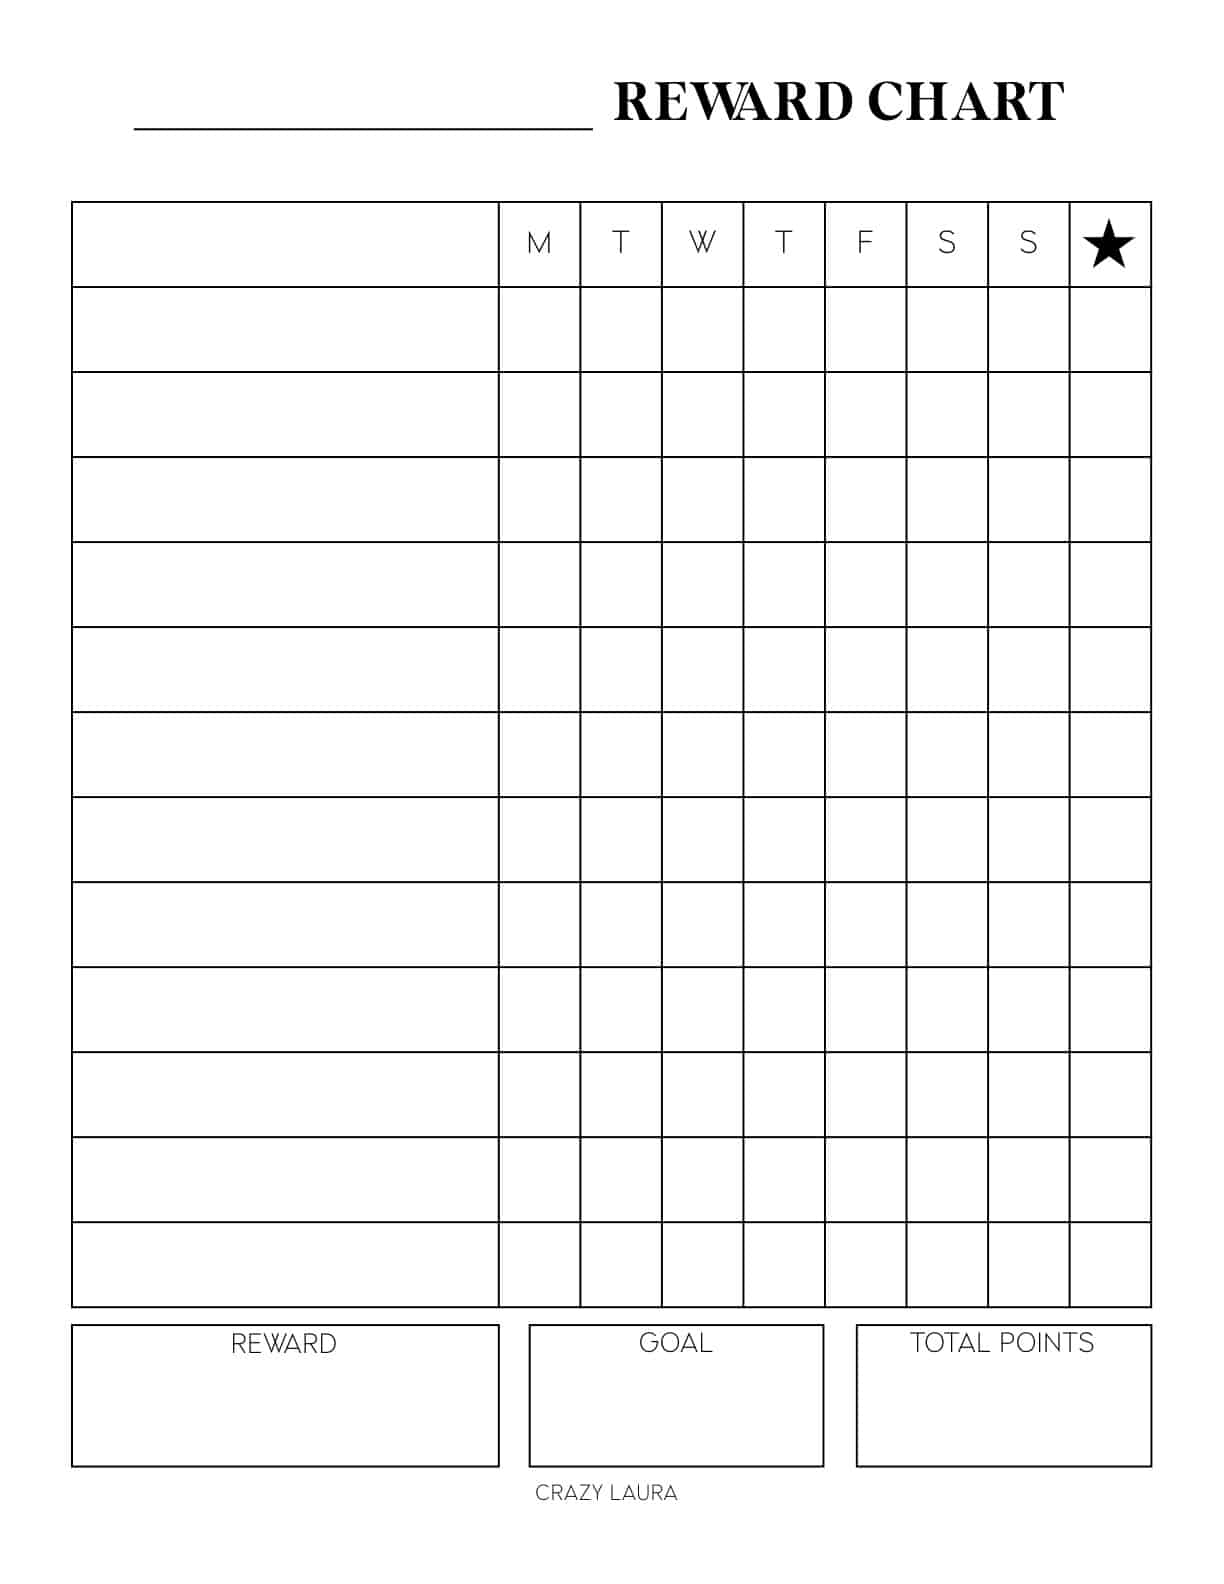 Free Reward Chart Printable For Kids With Two Versions - Crazy Laura Pertaining To Blank Reward Chart Template